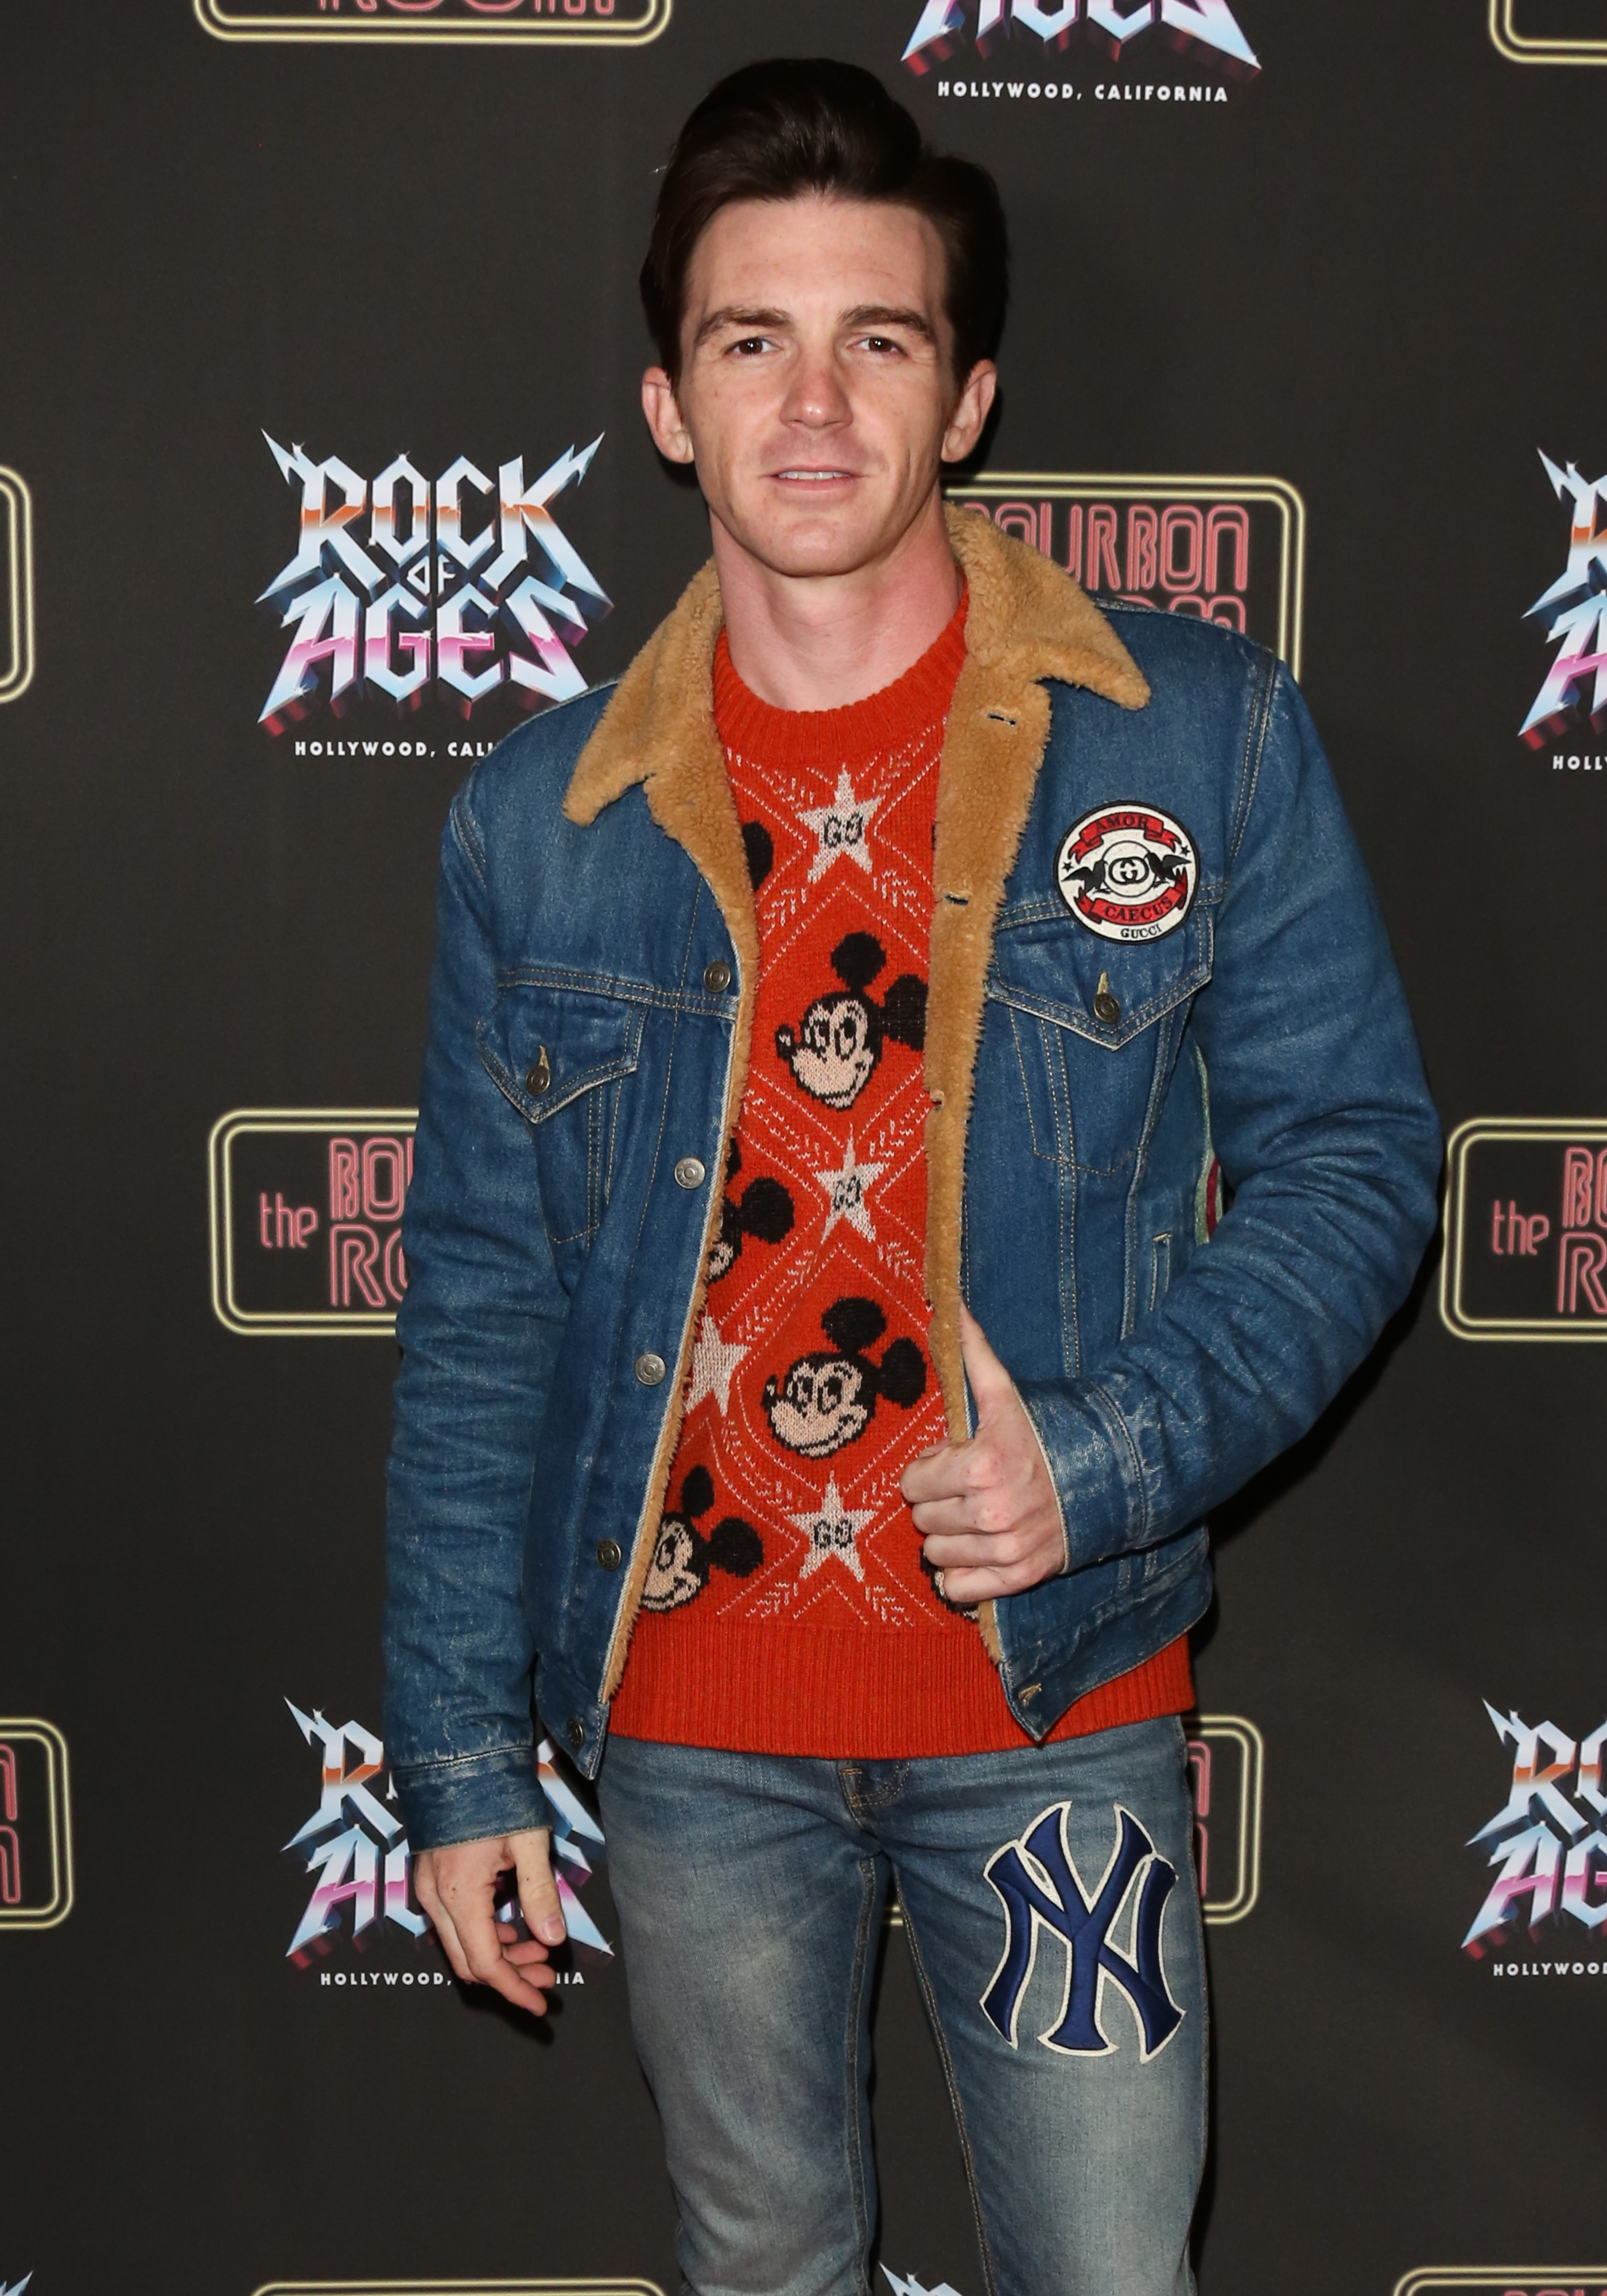 Drake Bell at an event wearing a denim jacket, patterned sweater, and jeans